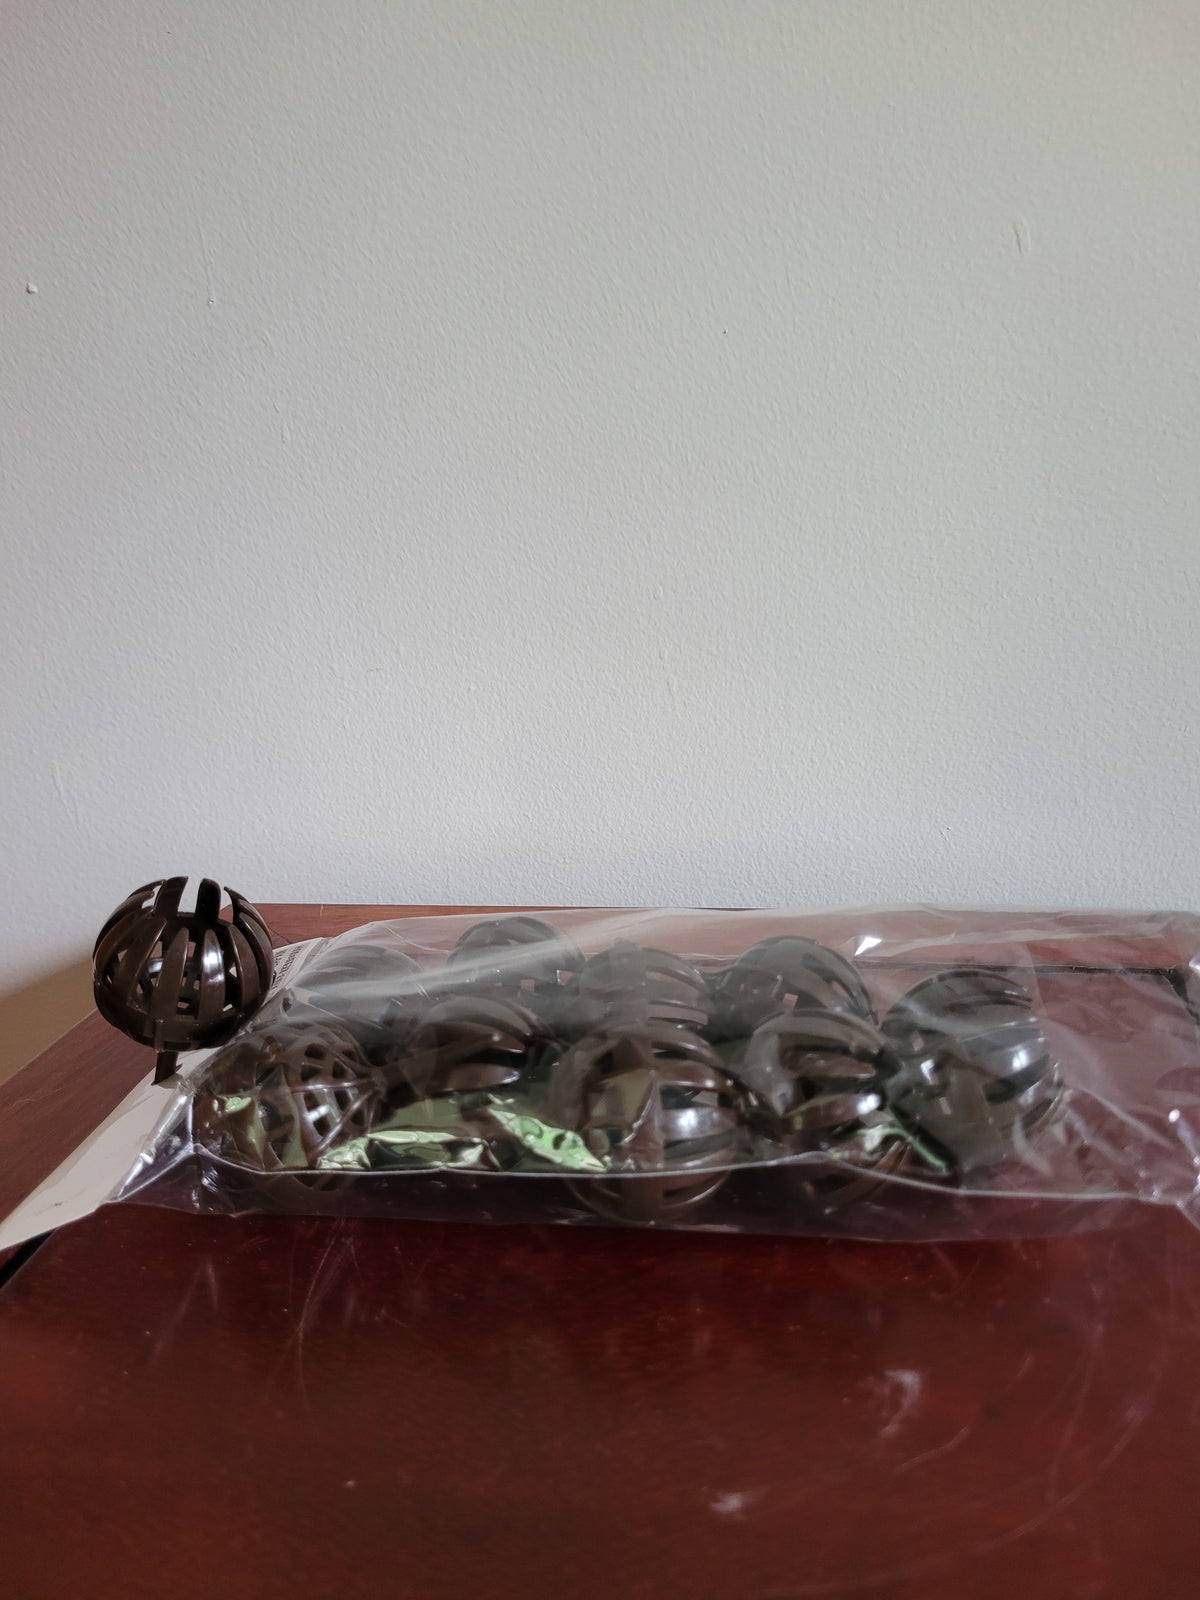 Package of 10 pieces - 1.5" fertilizer dispensing balls (plastic from Japan)